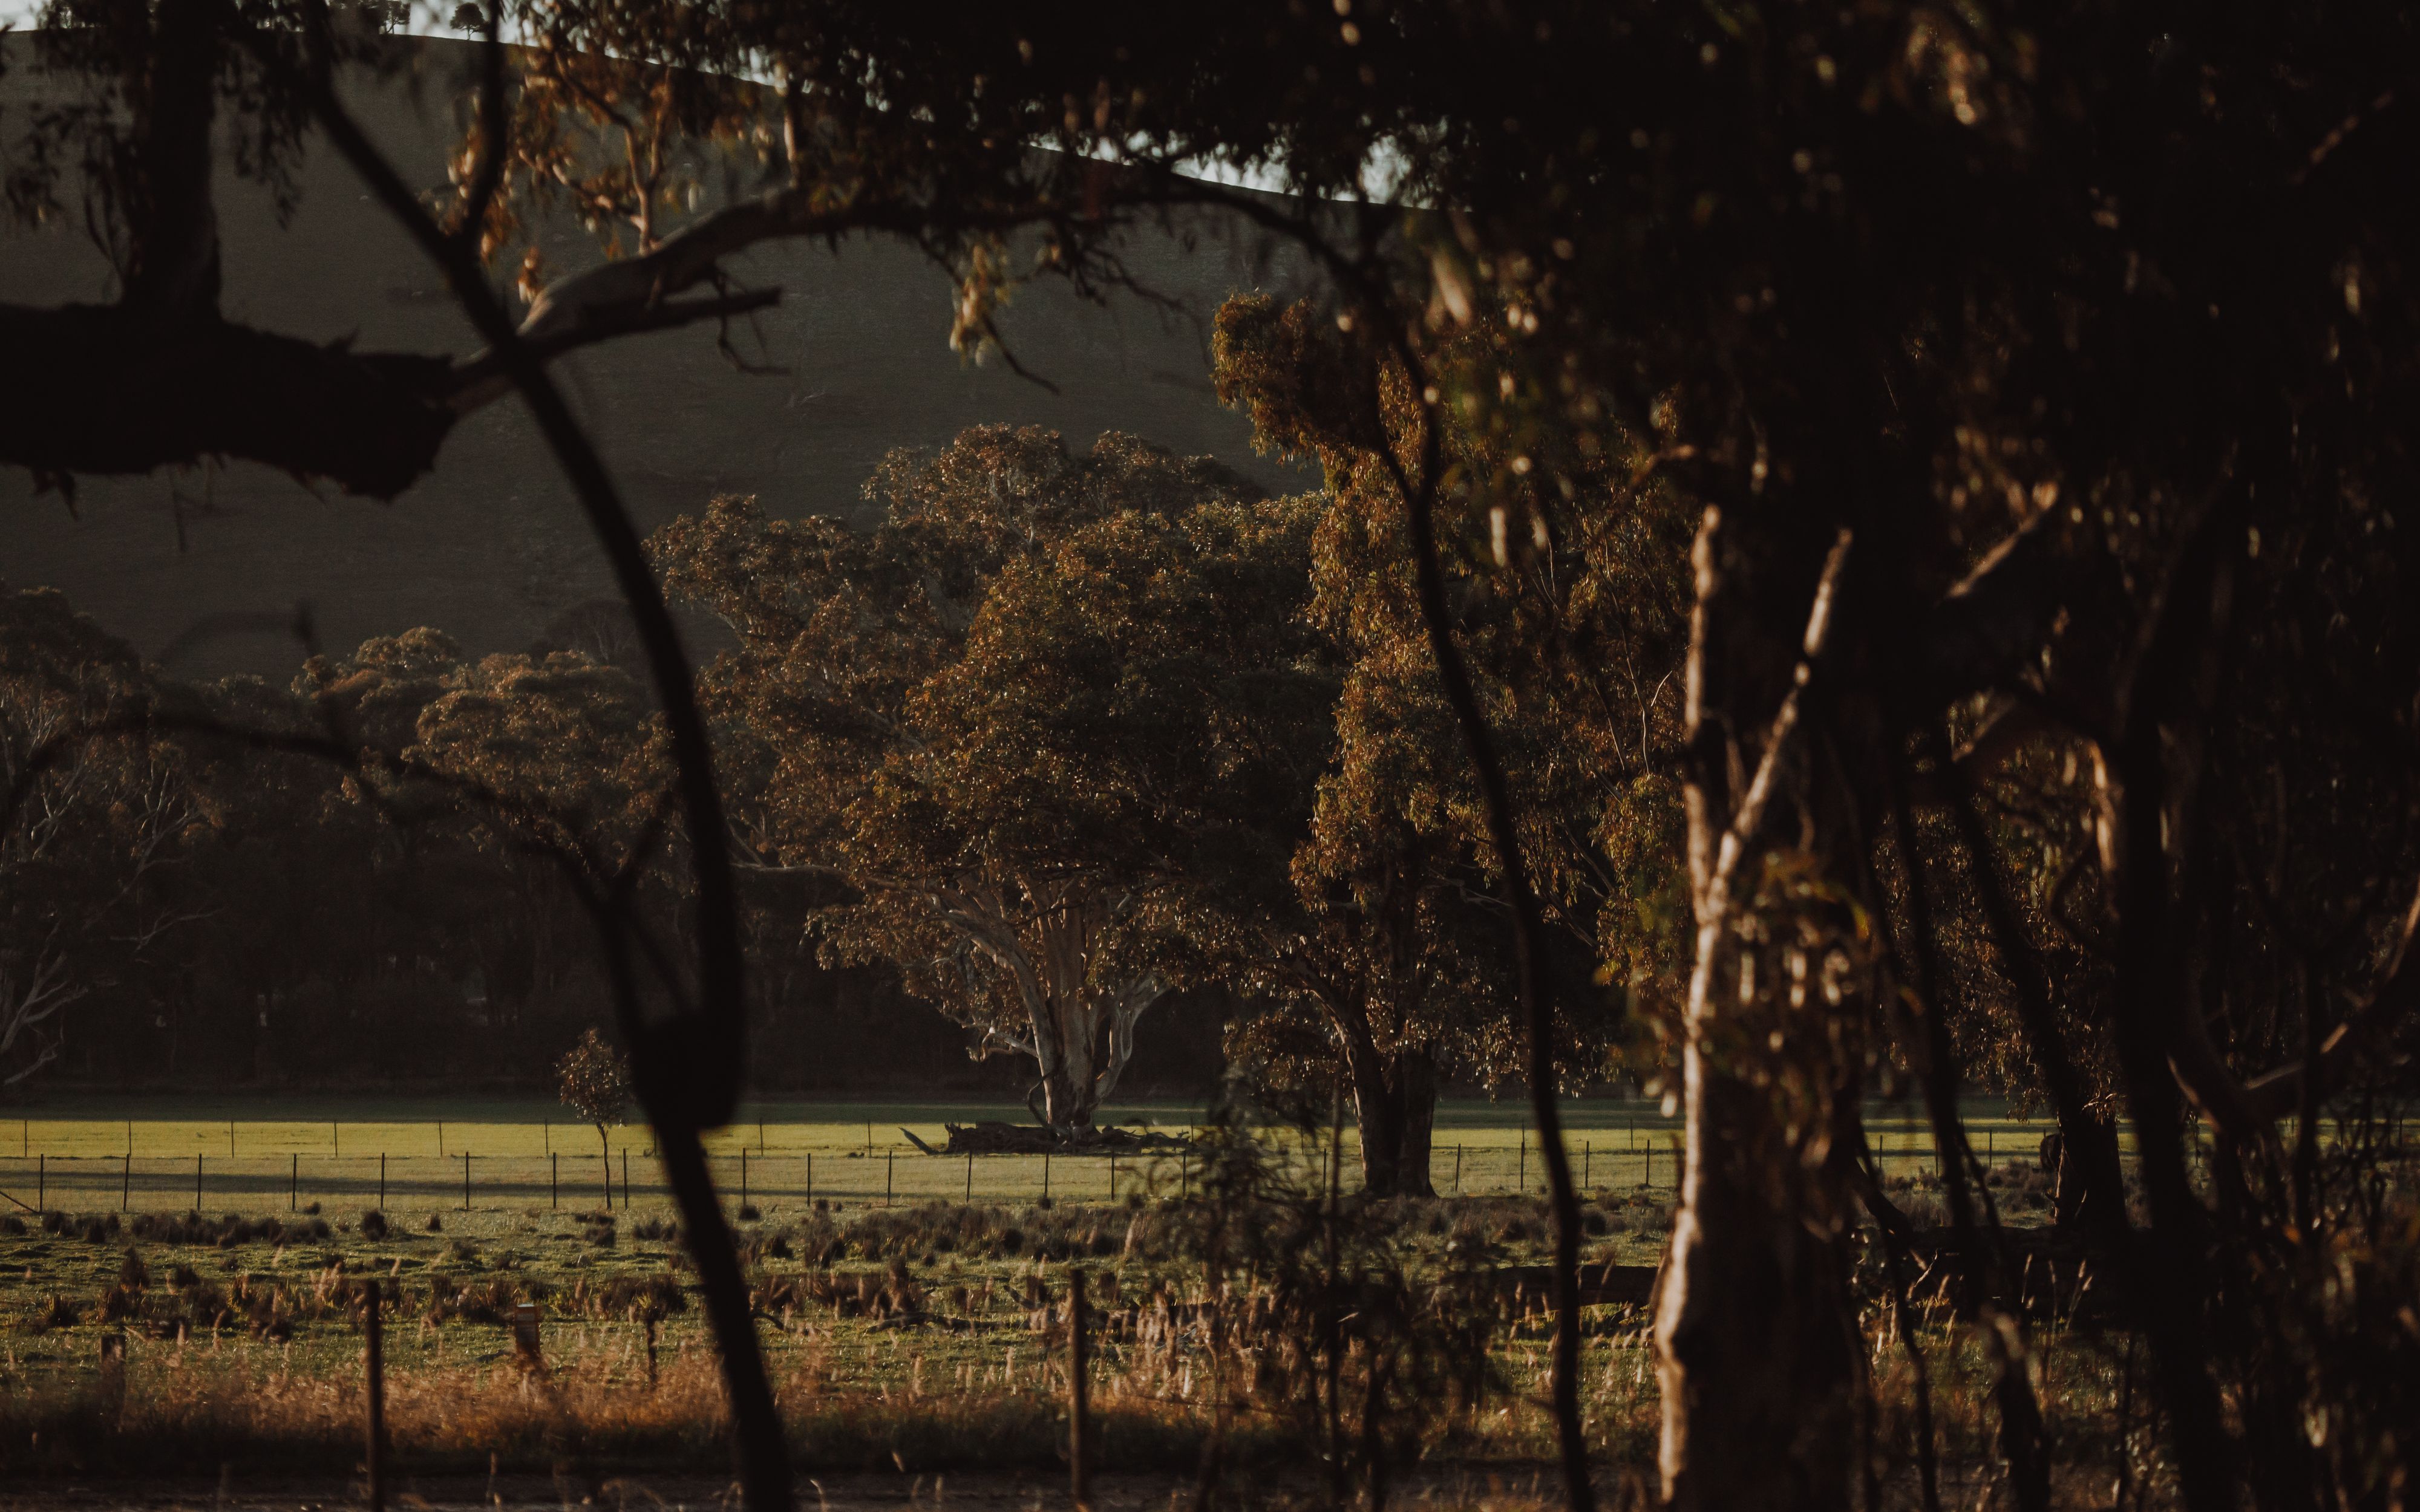 :andscape scene of large gum trees in Upper Murray Valley, NSW